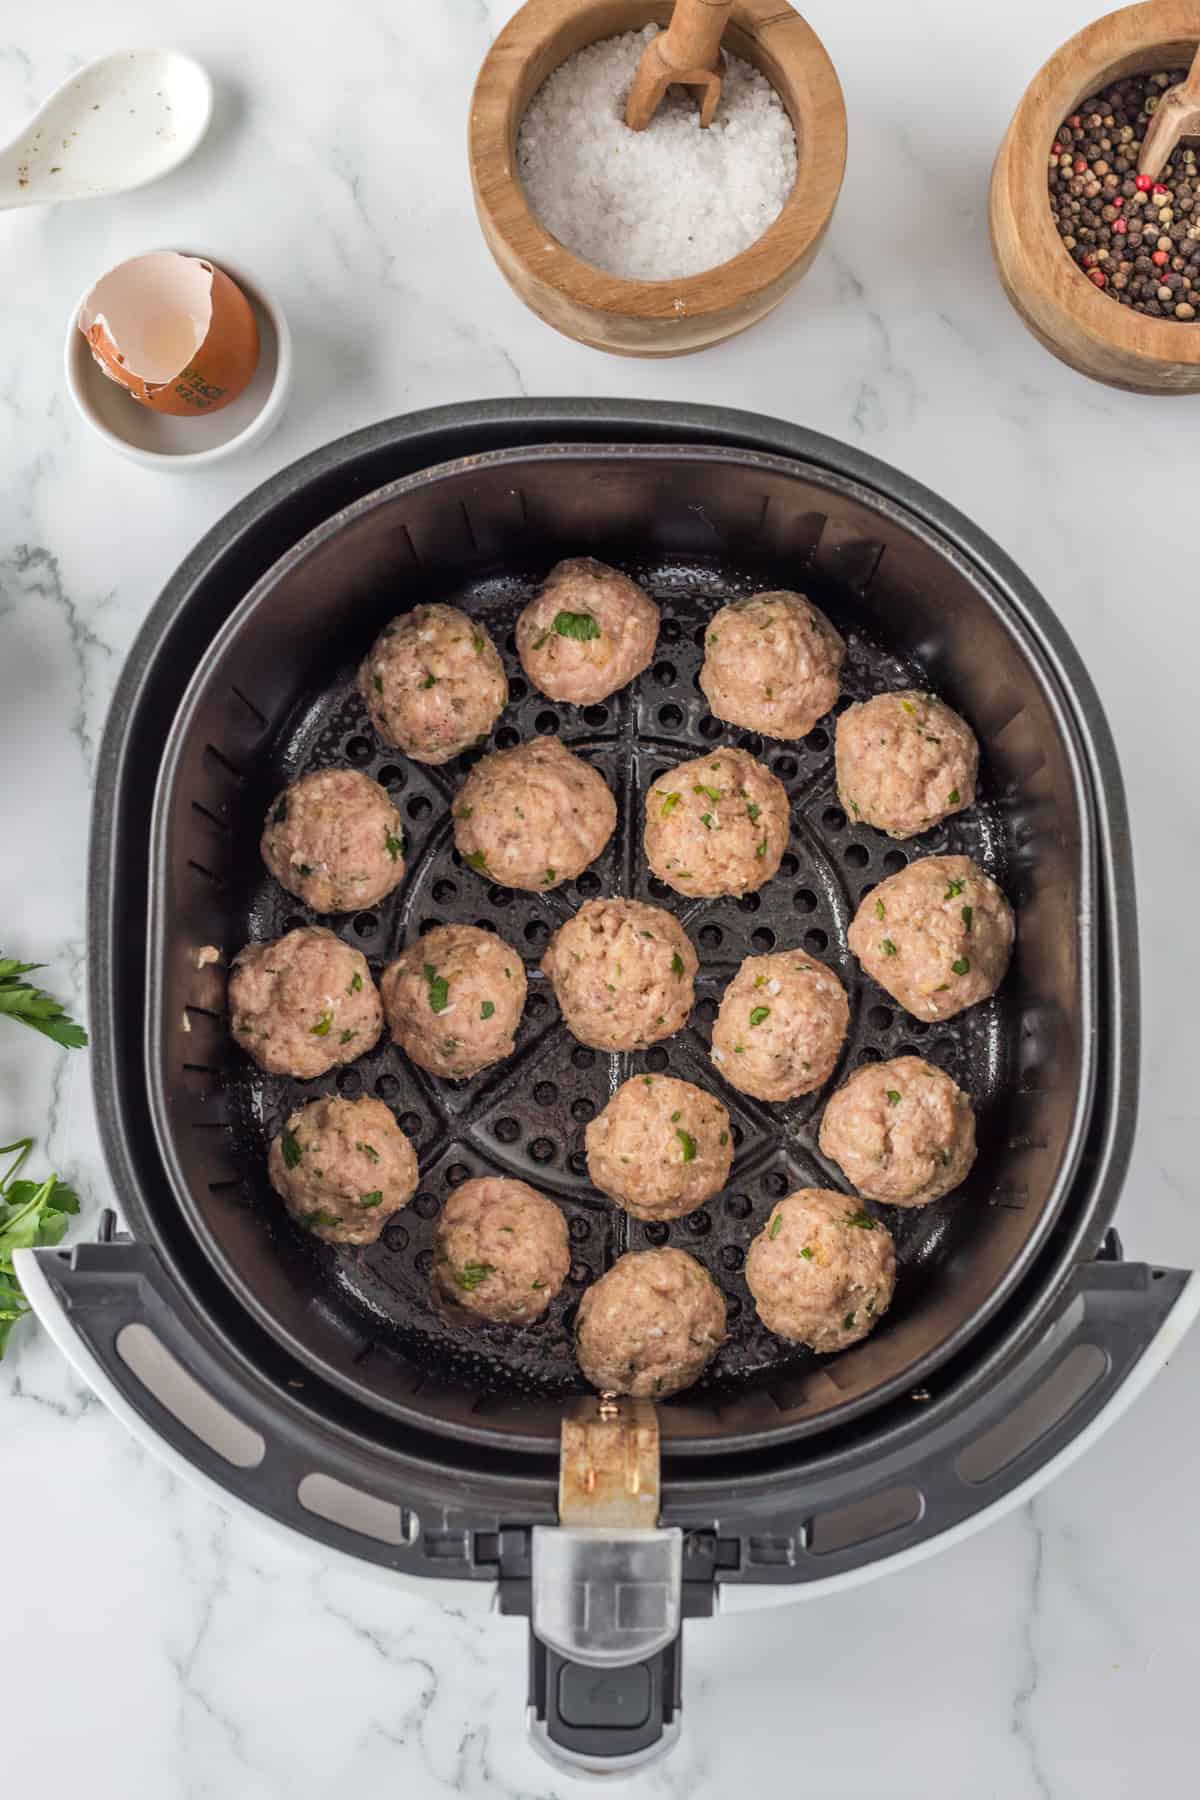 uncooked meatball in the basket of the air fryer